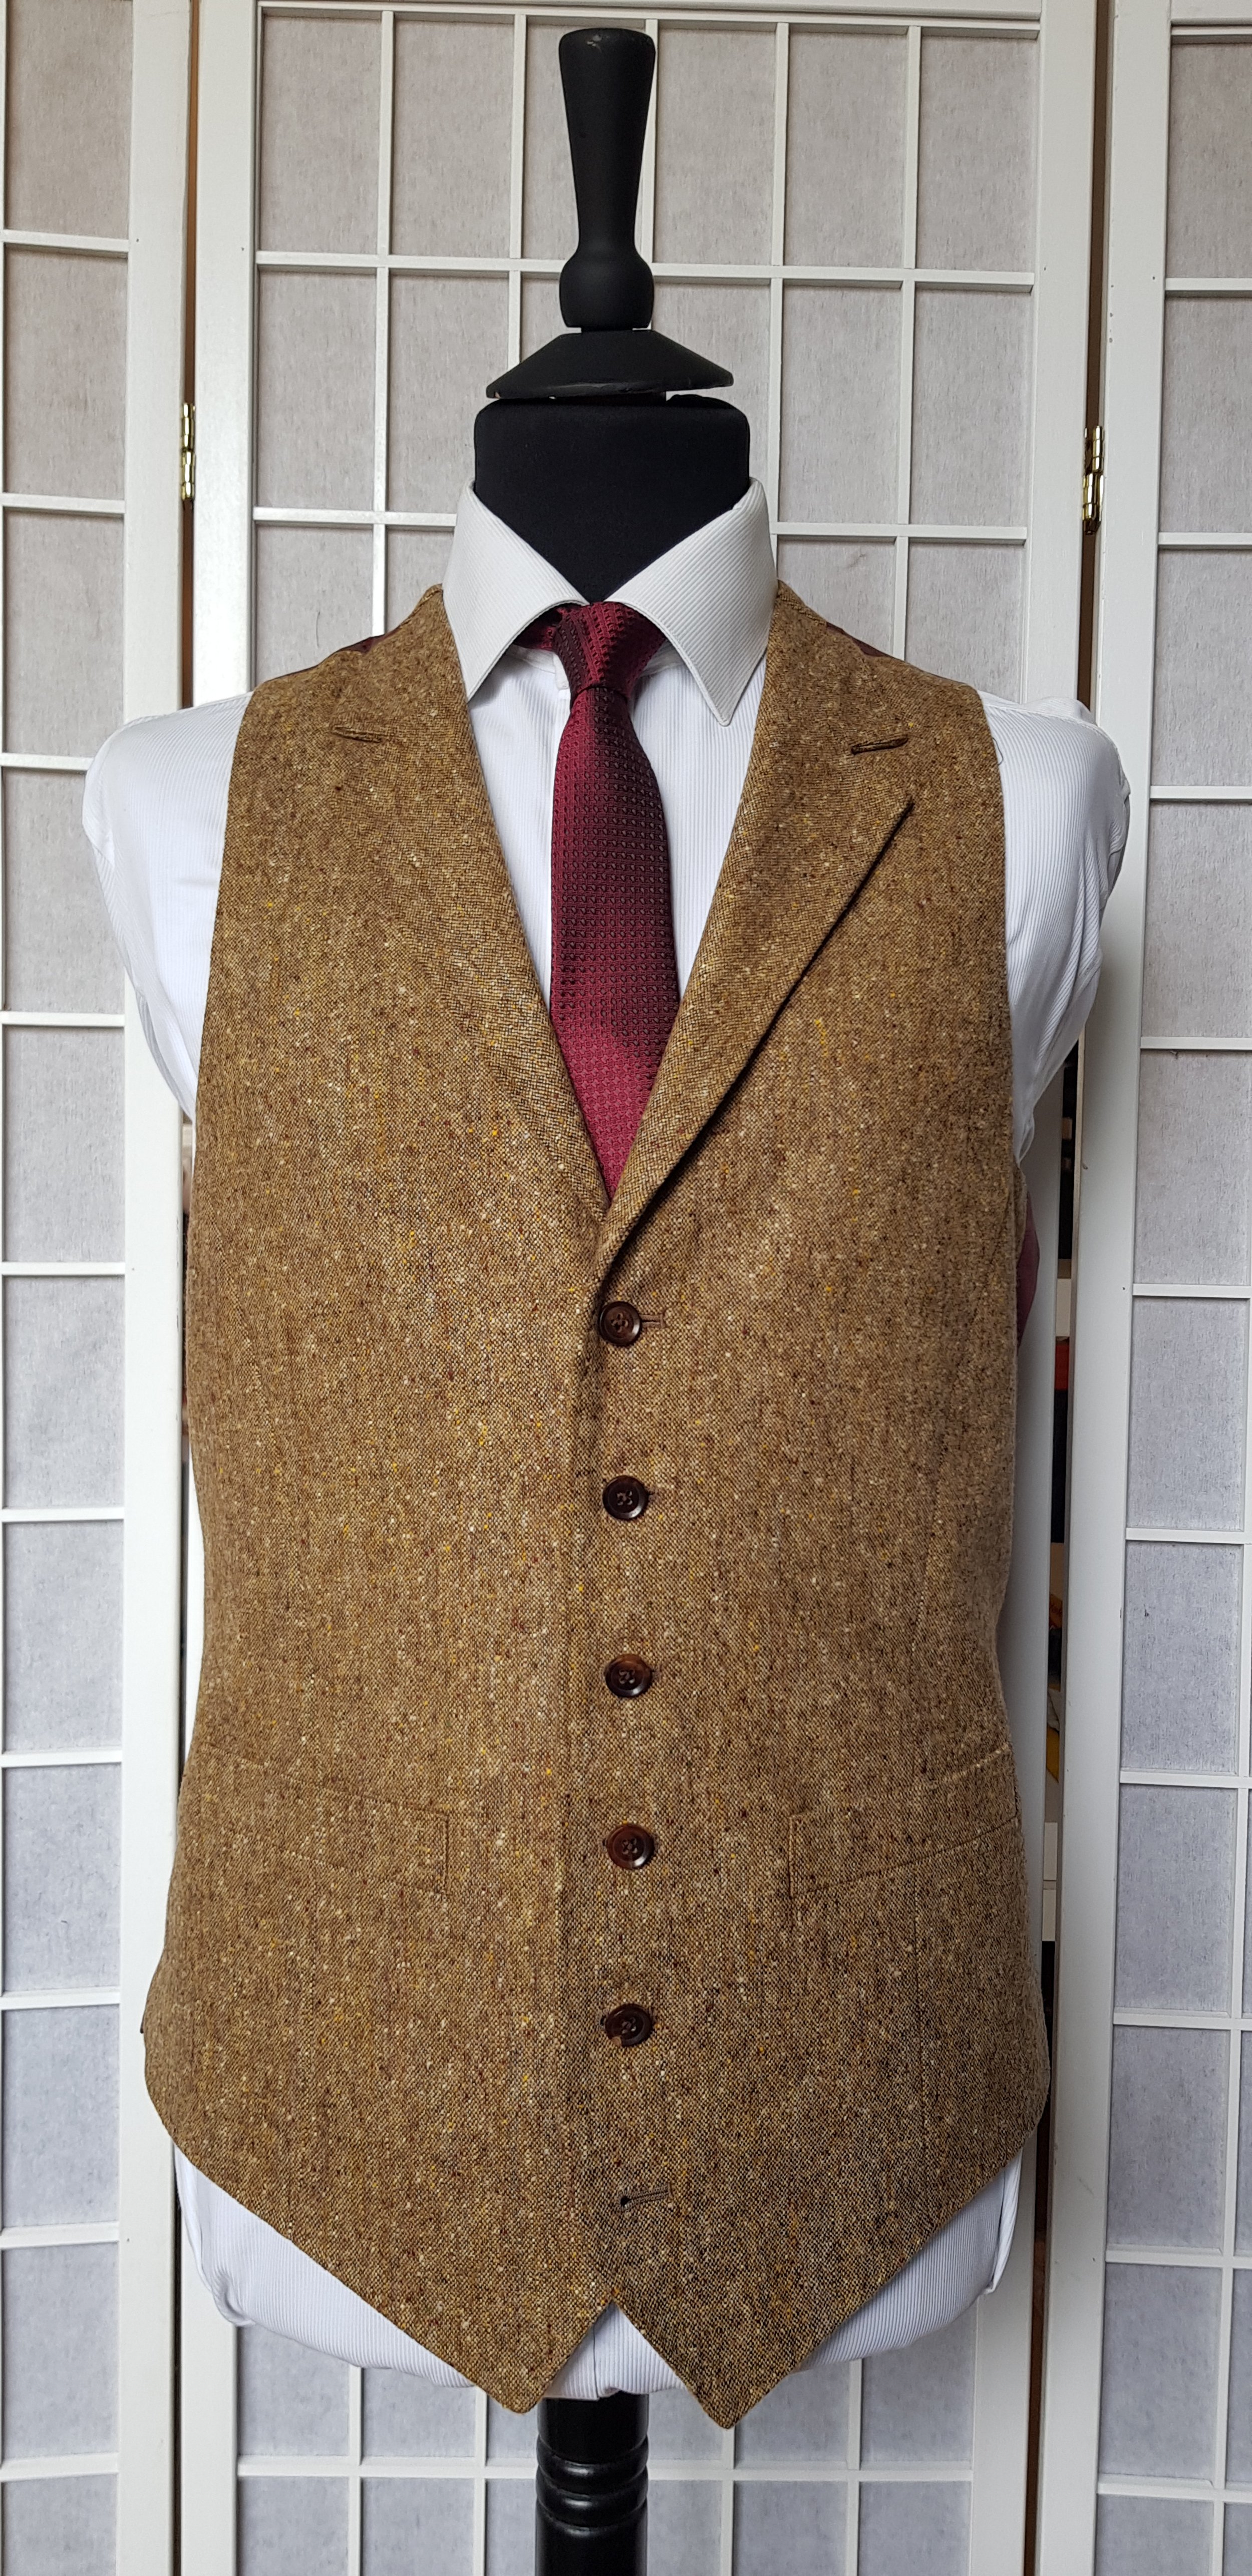 Holland & Sherry Donegal Tweed Suit (2).jpg